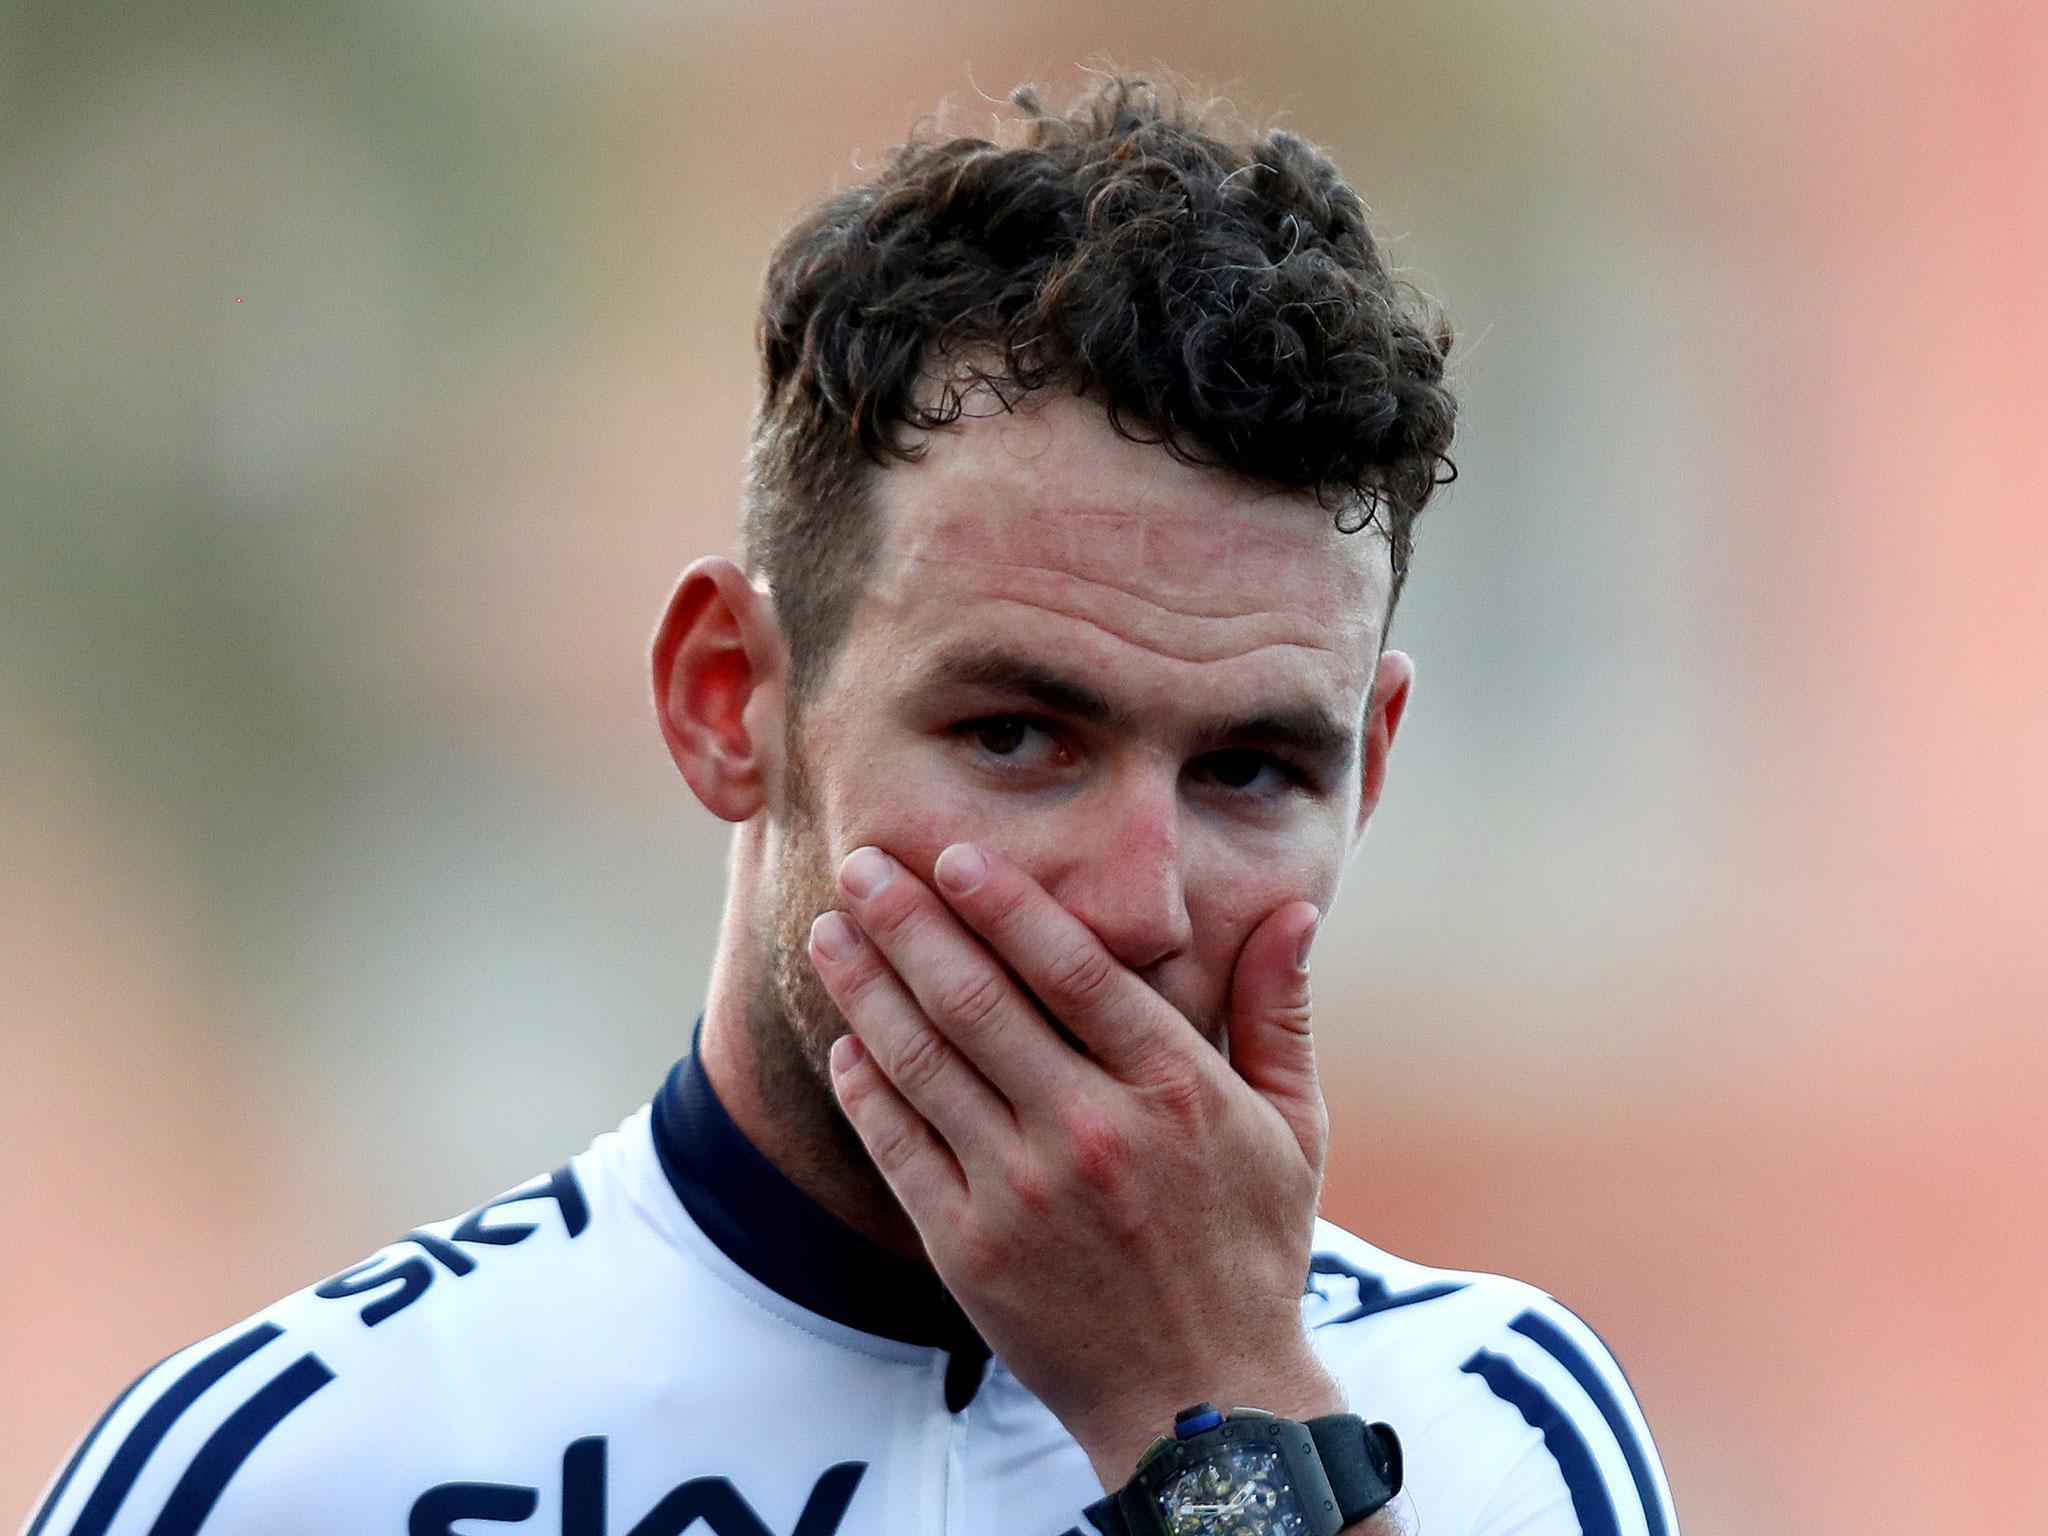 Mark Cavendish has not raced since the Milan-San Remo one-day race on March 18